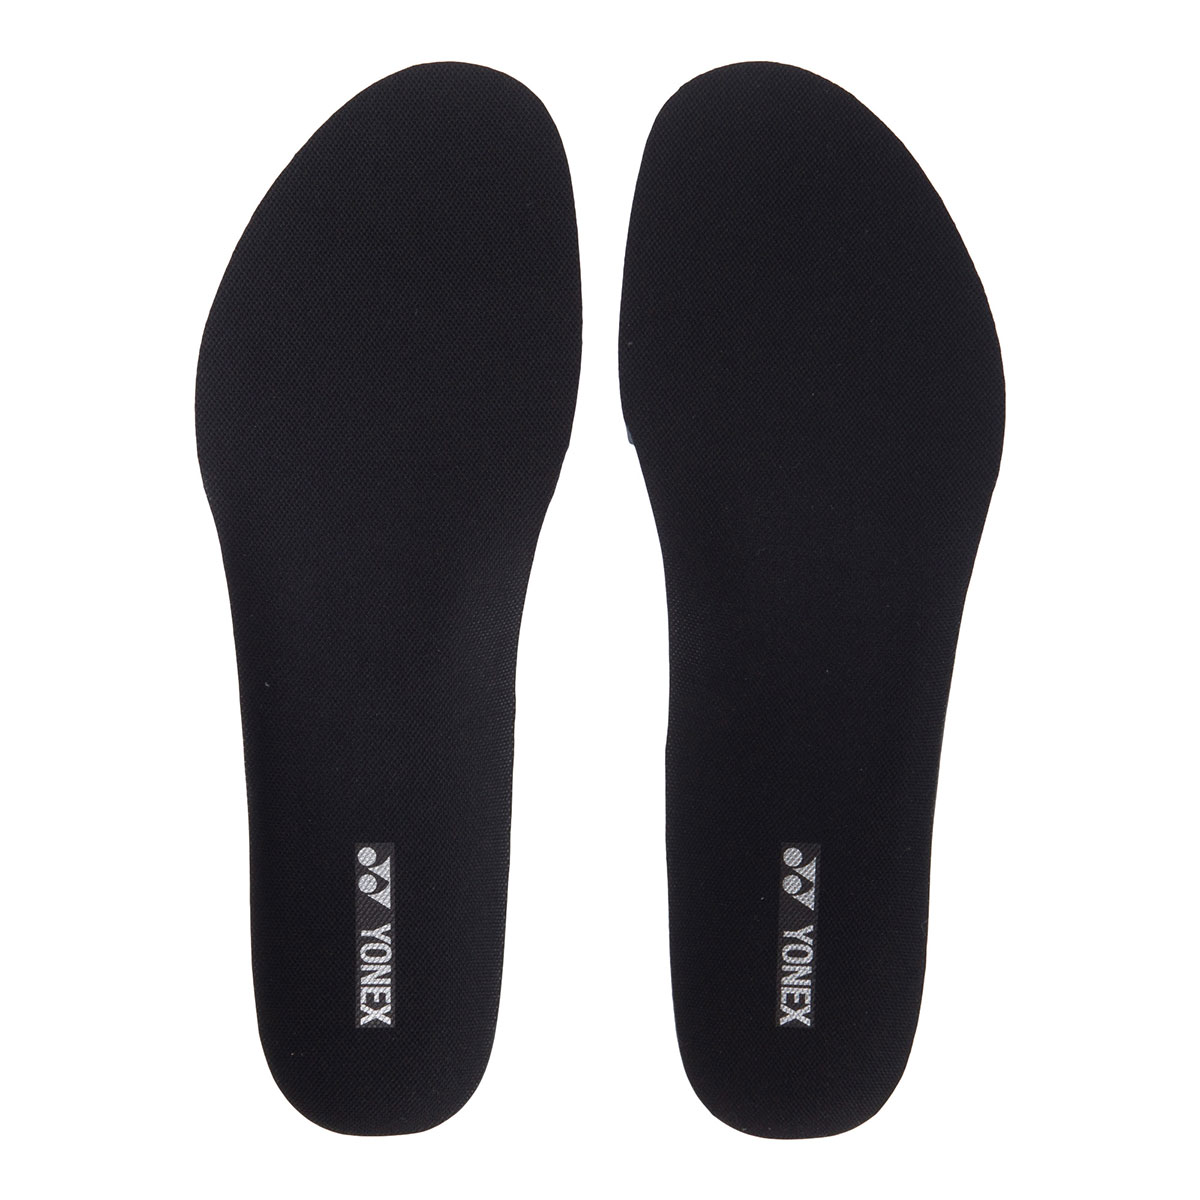 yonex insole replacement